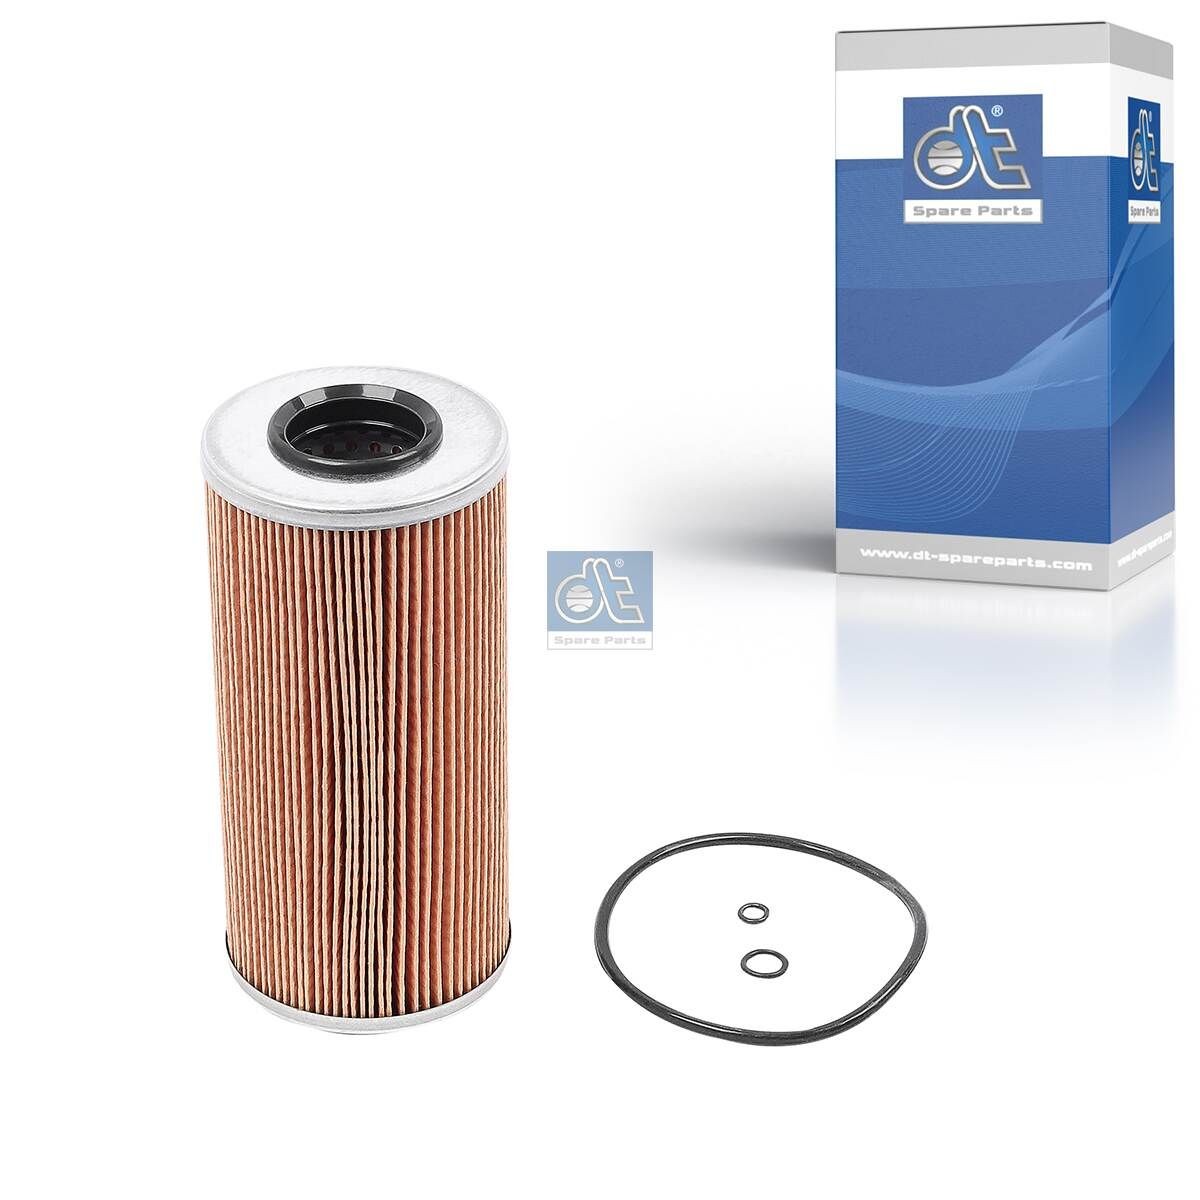 HU 951 x DT Spare Parts 3.14108 Oil filter A606 184 0225